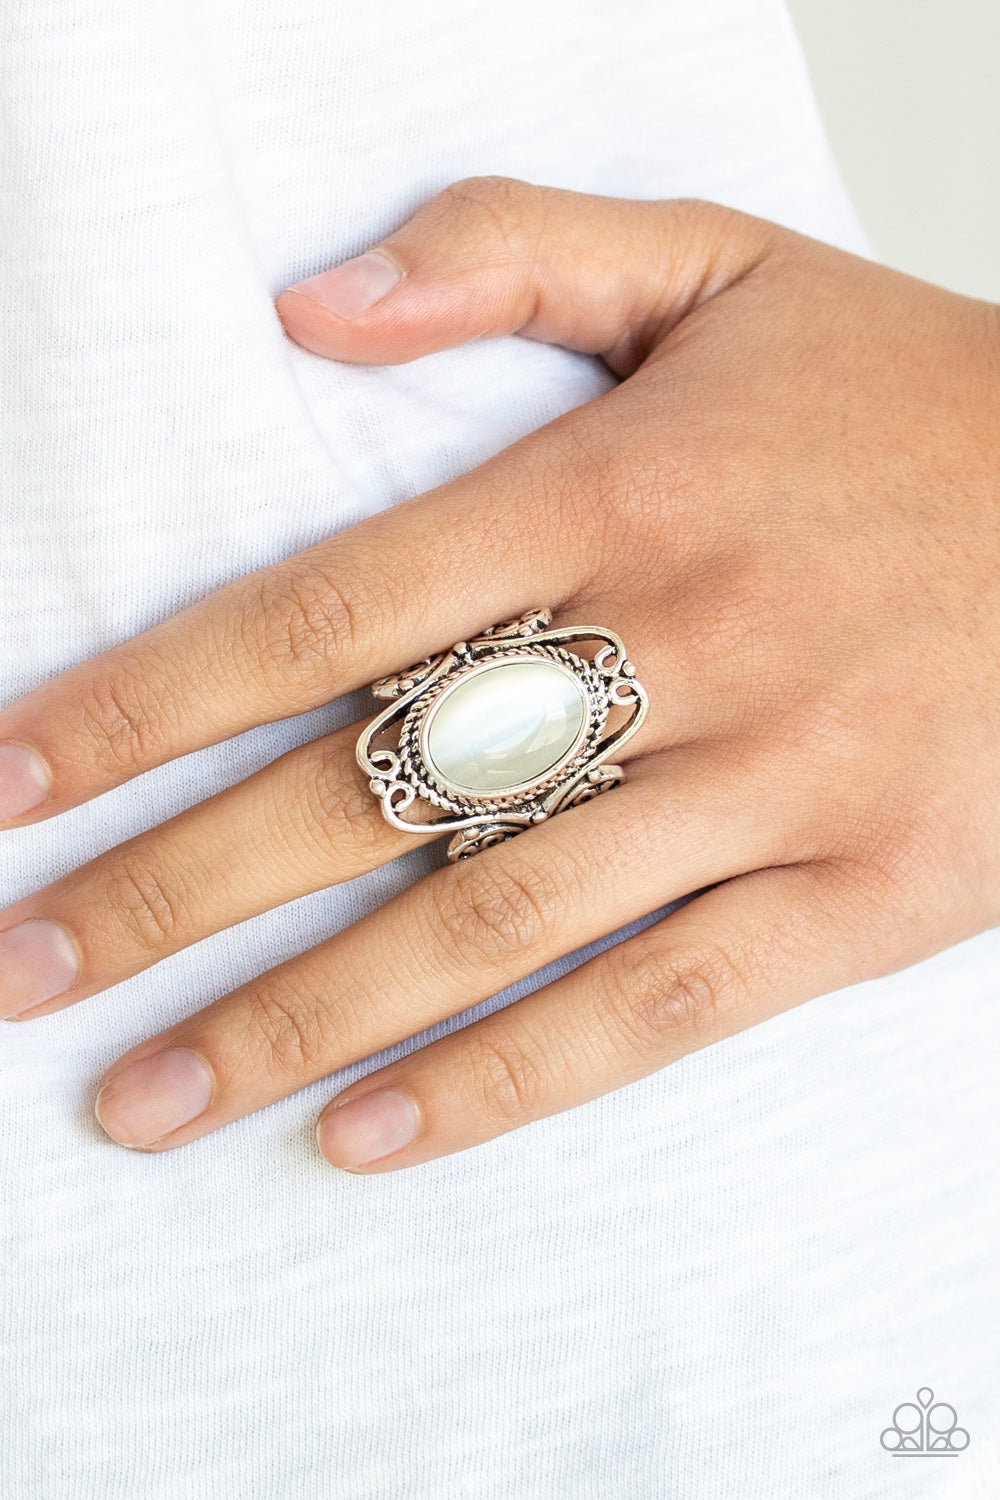 PRE-ORDER - Paparazzi Fairytale Flair - White Cat's Eye Stone - Ring - $5 Jewelry with Ashley Swint